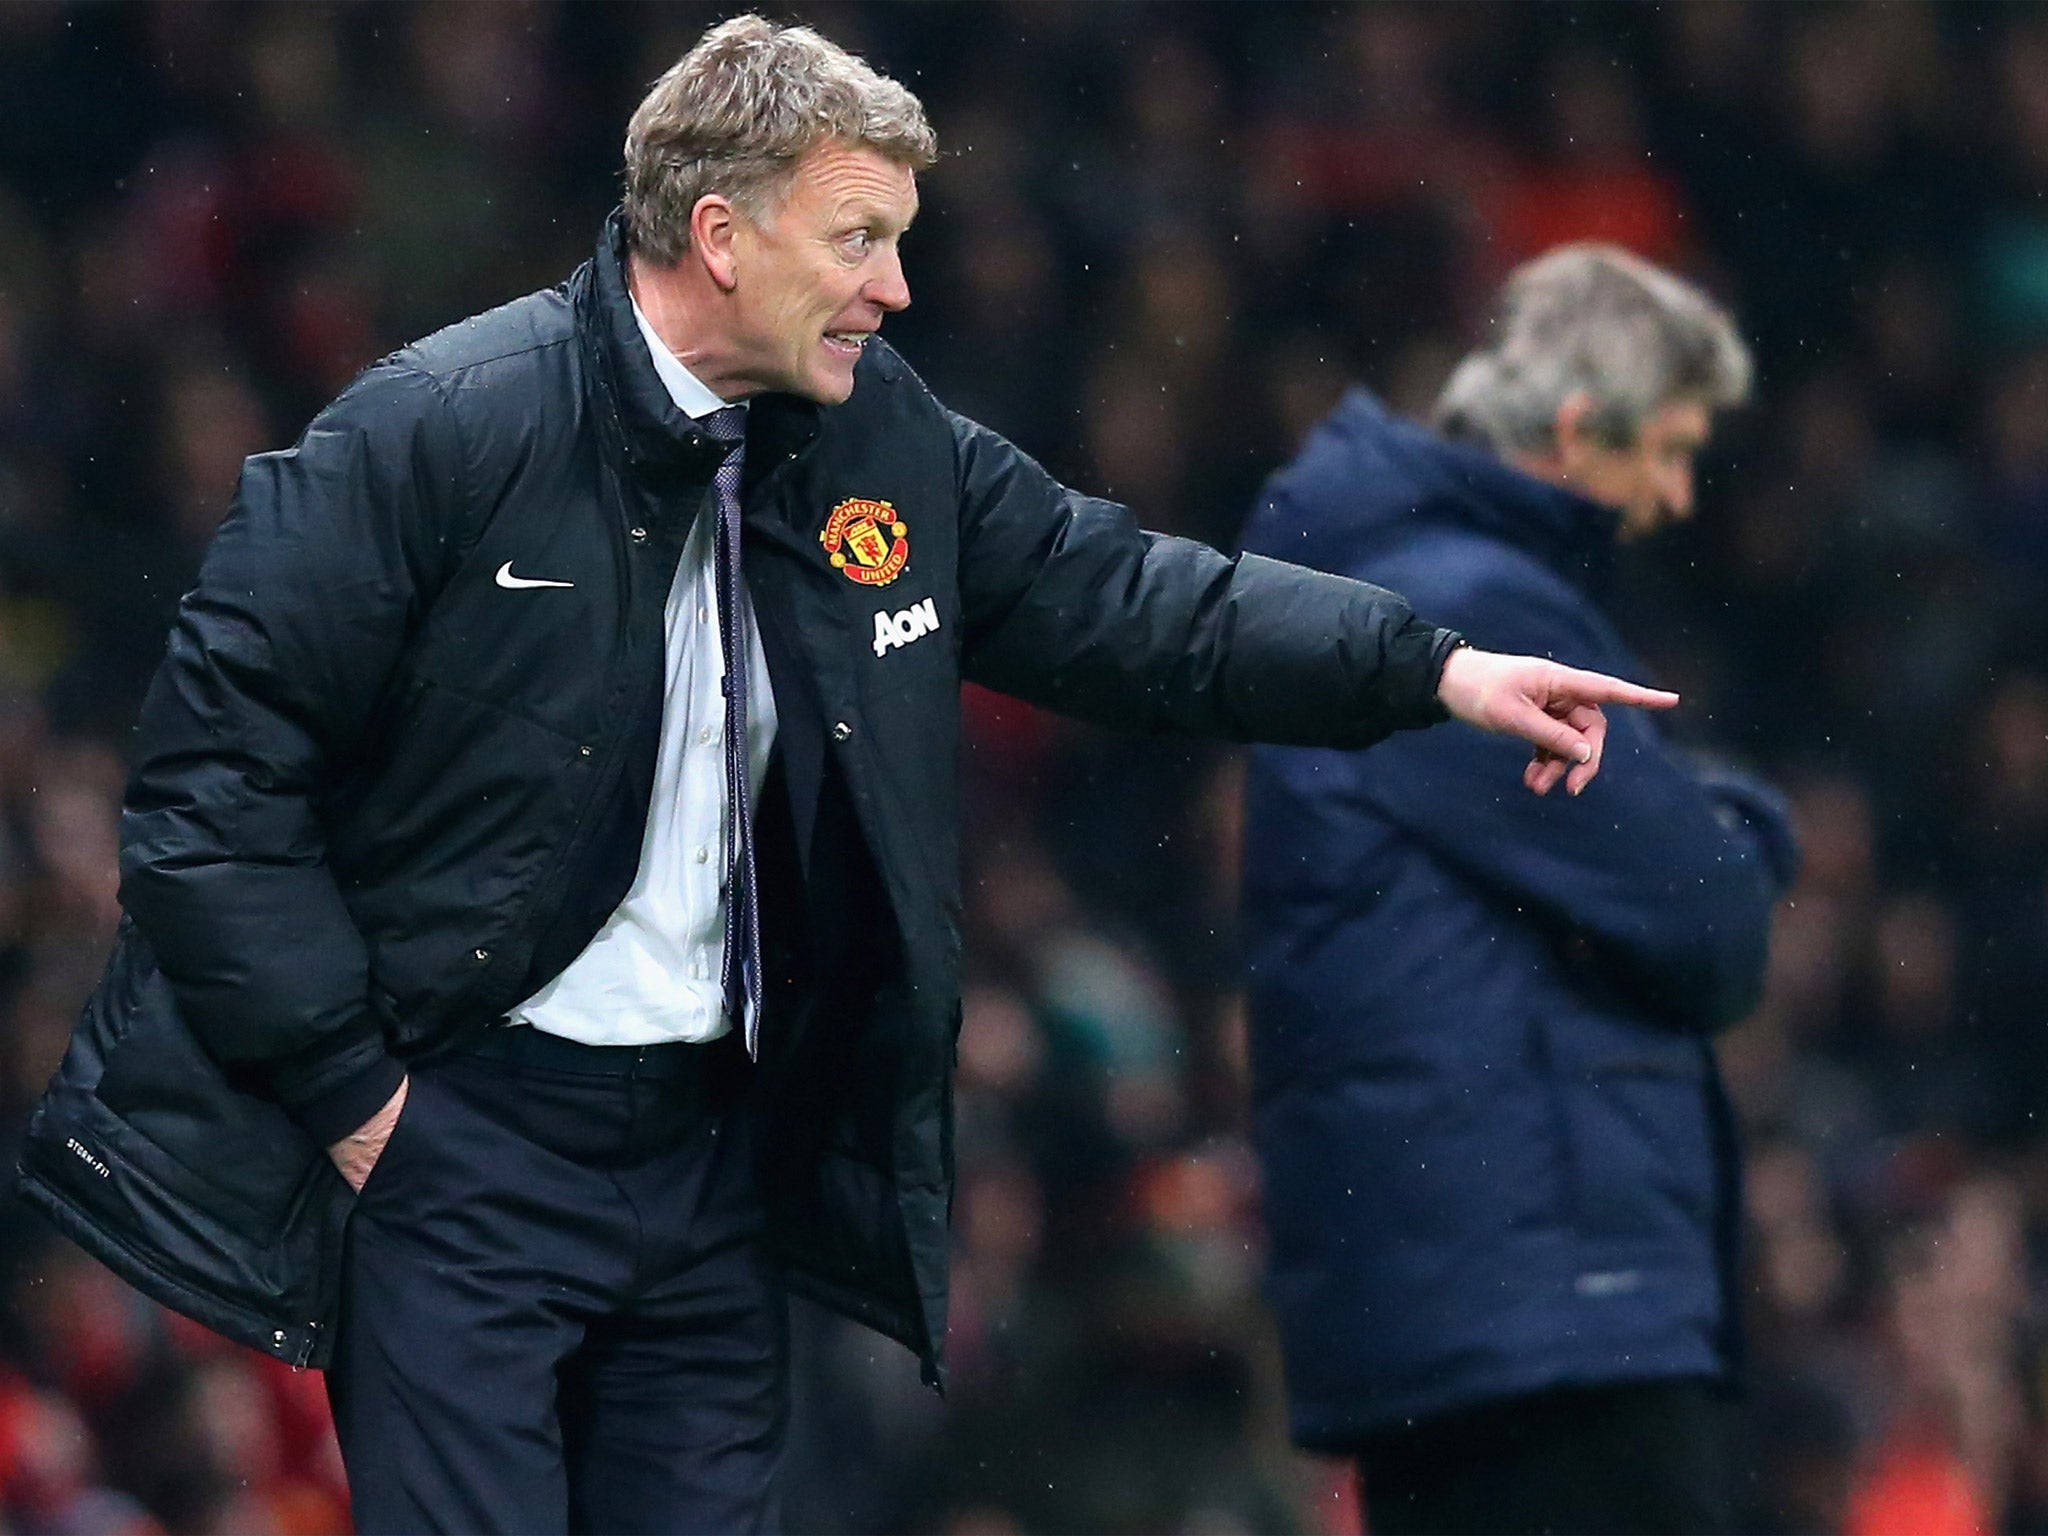 David Moyes issues instructions from the sideline against at Old Trafford on Wednesday night